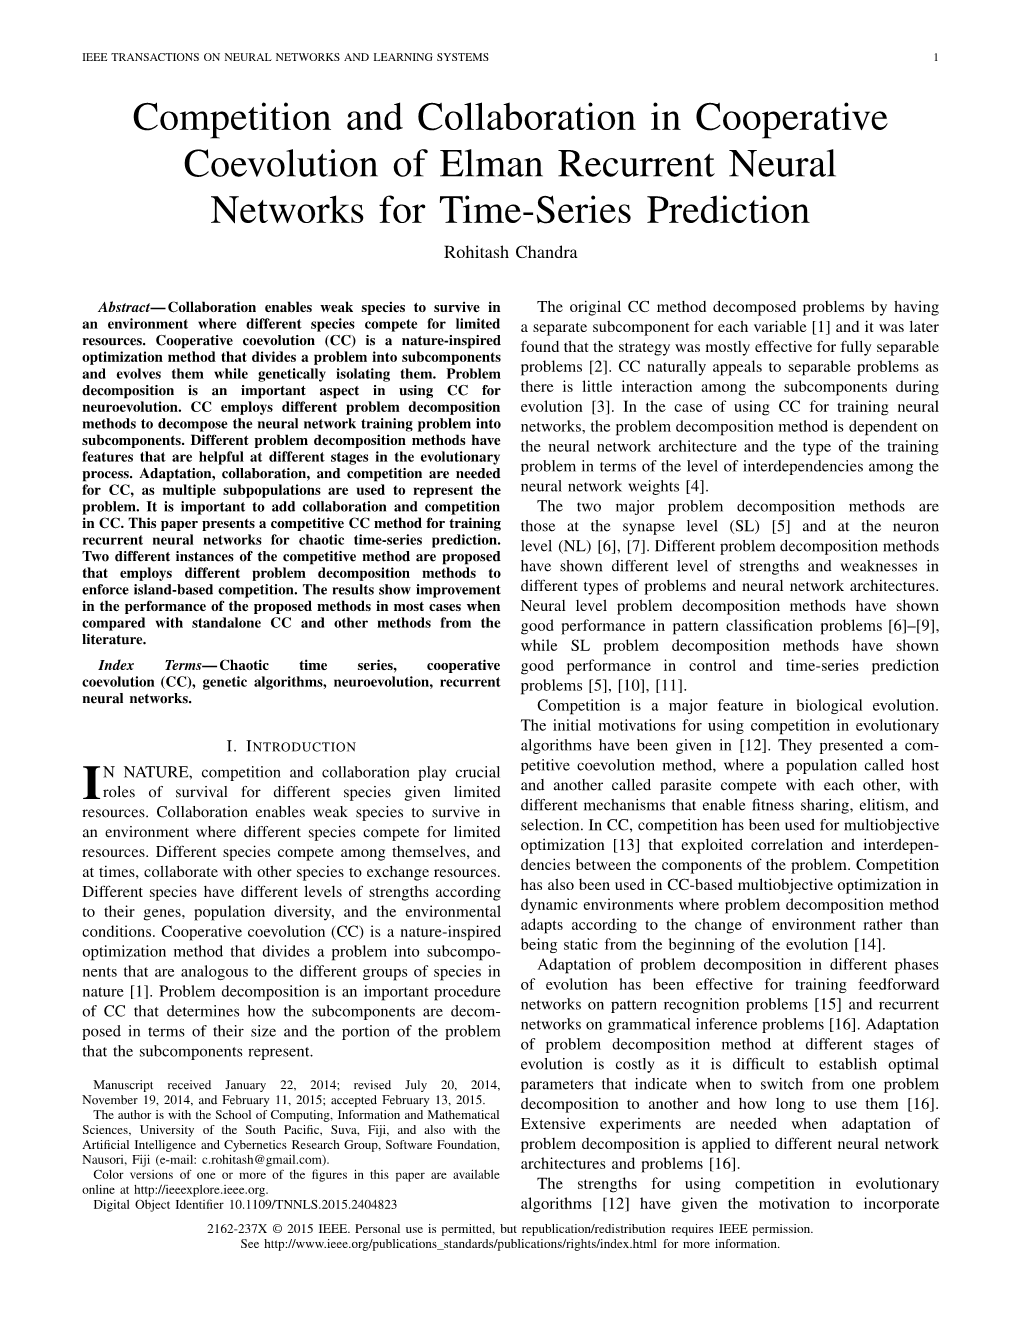 Competition and Collaboration in Cooperative Coevolution of Elman Recurrent Neural Networks for Time-Series Prediction Rohitash Chandra